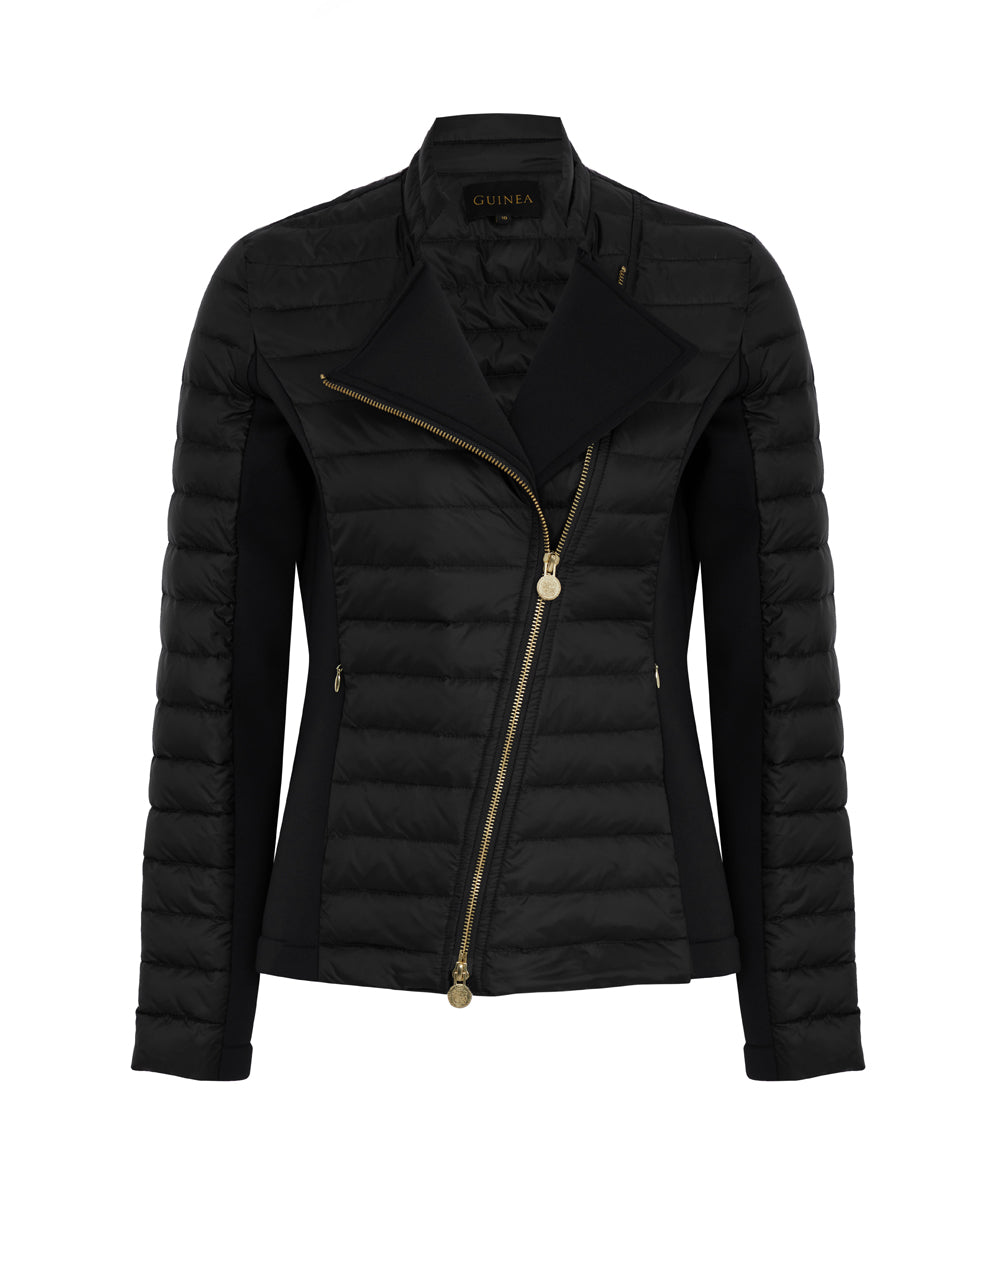 Women's black biker jacket in a puffer style with stretch side panels.